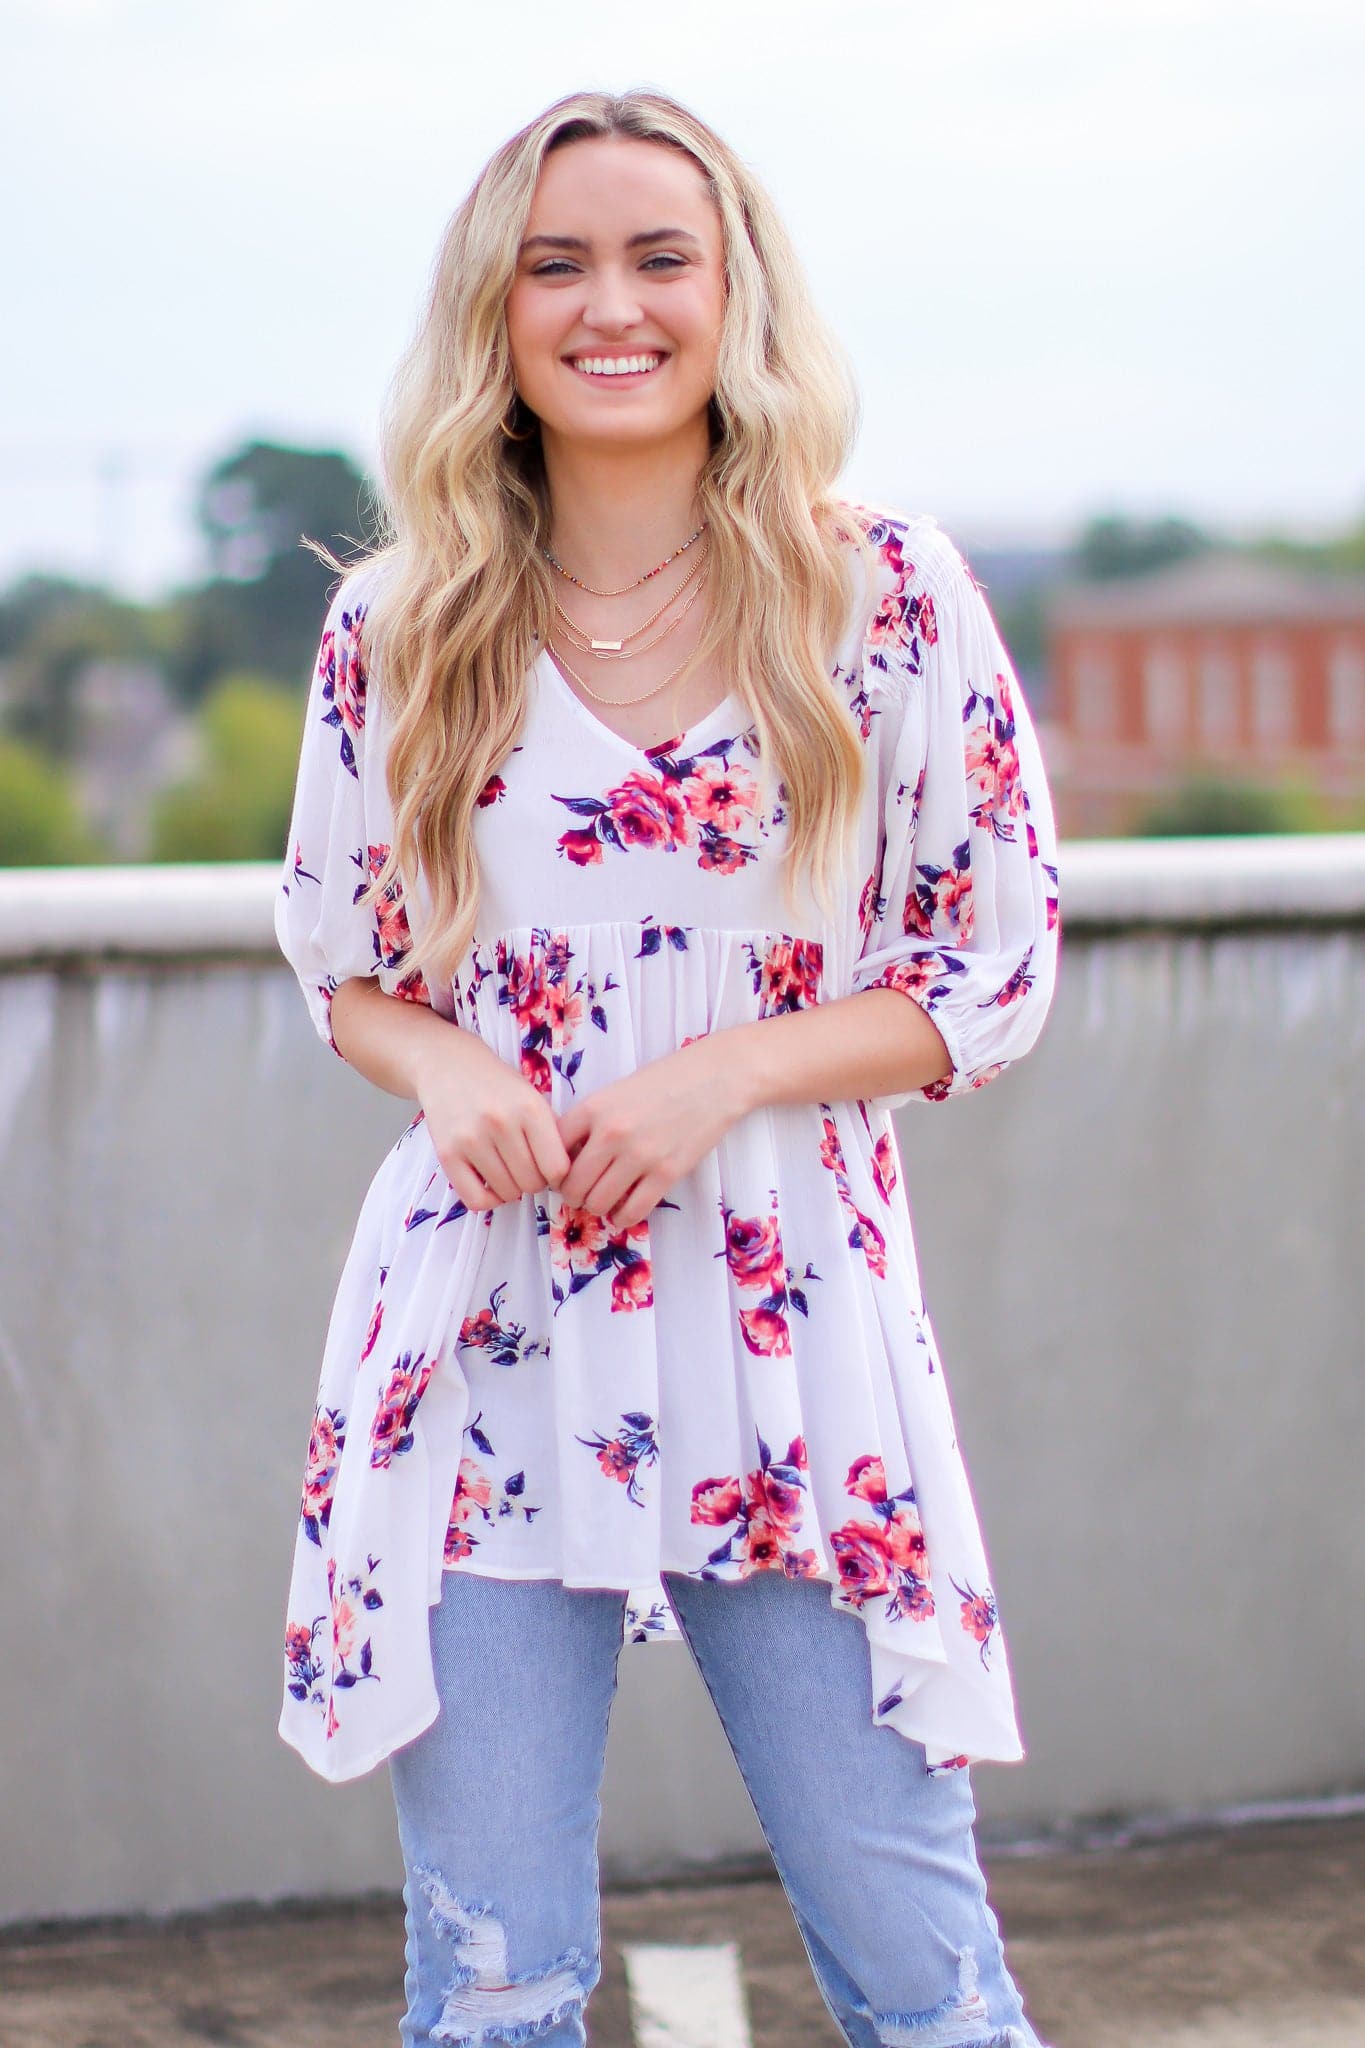  Totally Botanic Floral Tunic Top - CURVE - FINAL SALE - Madison and Mallory